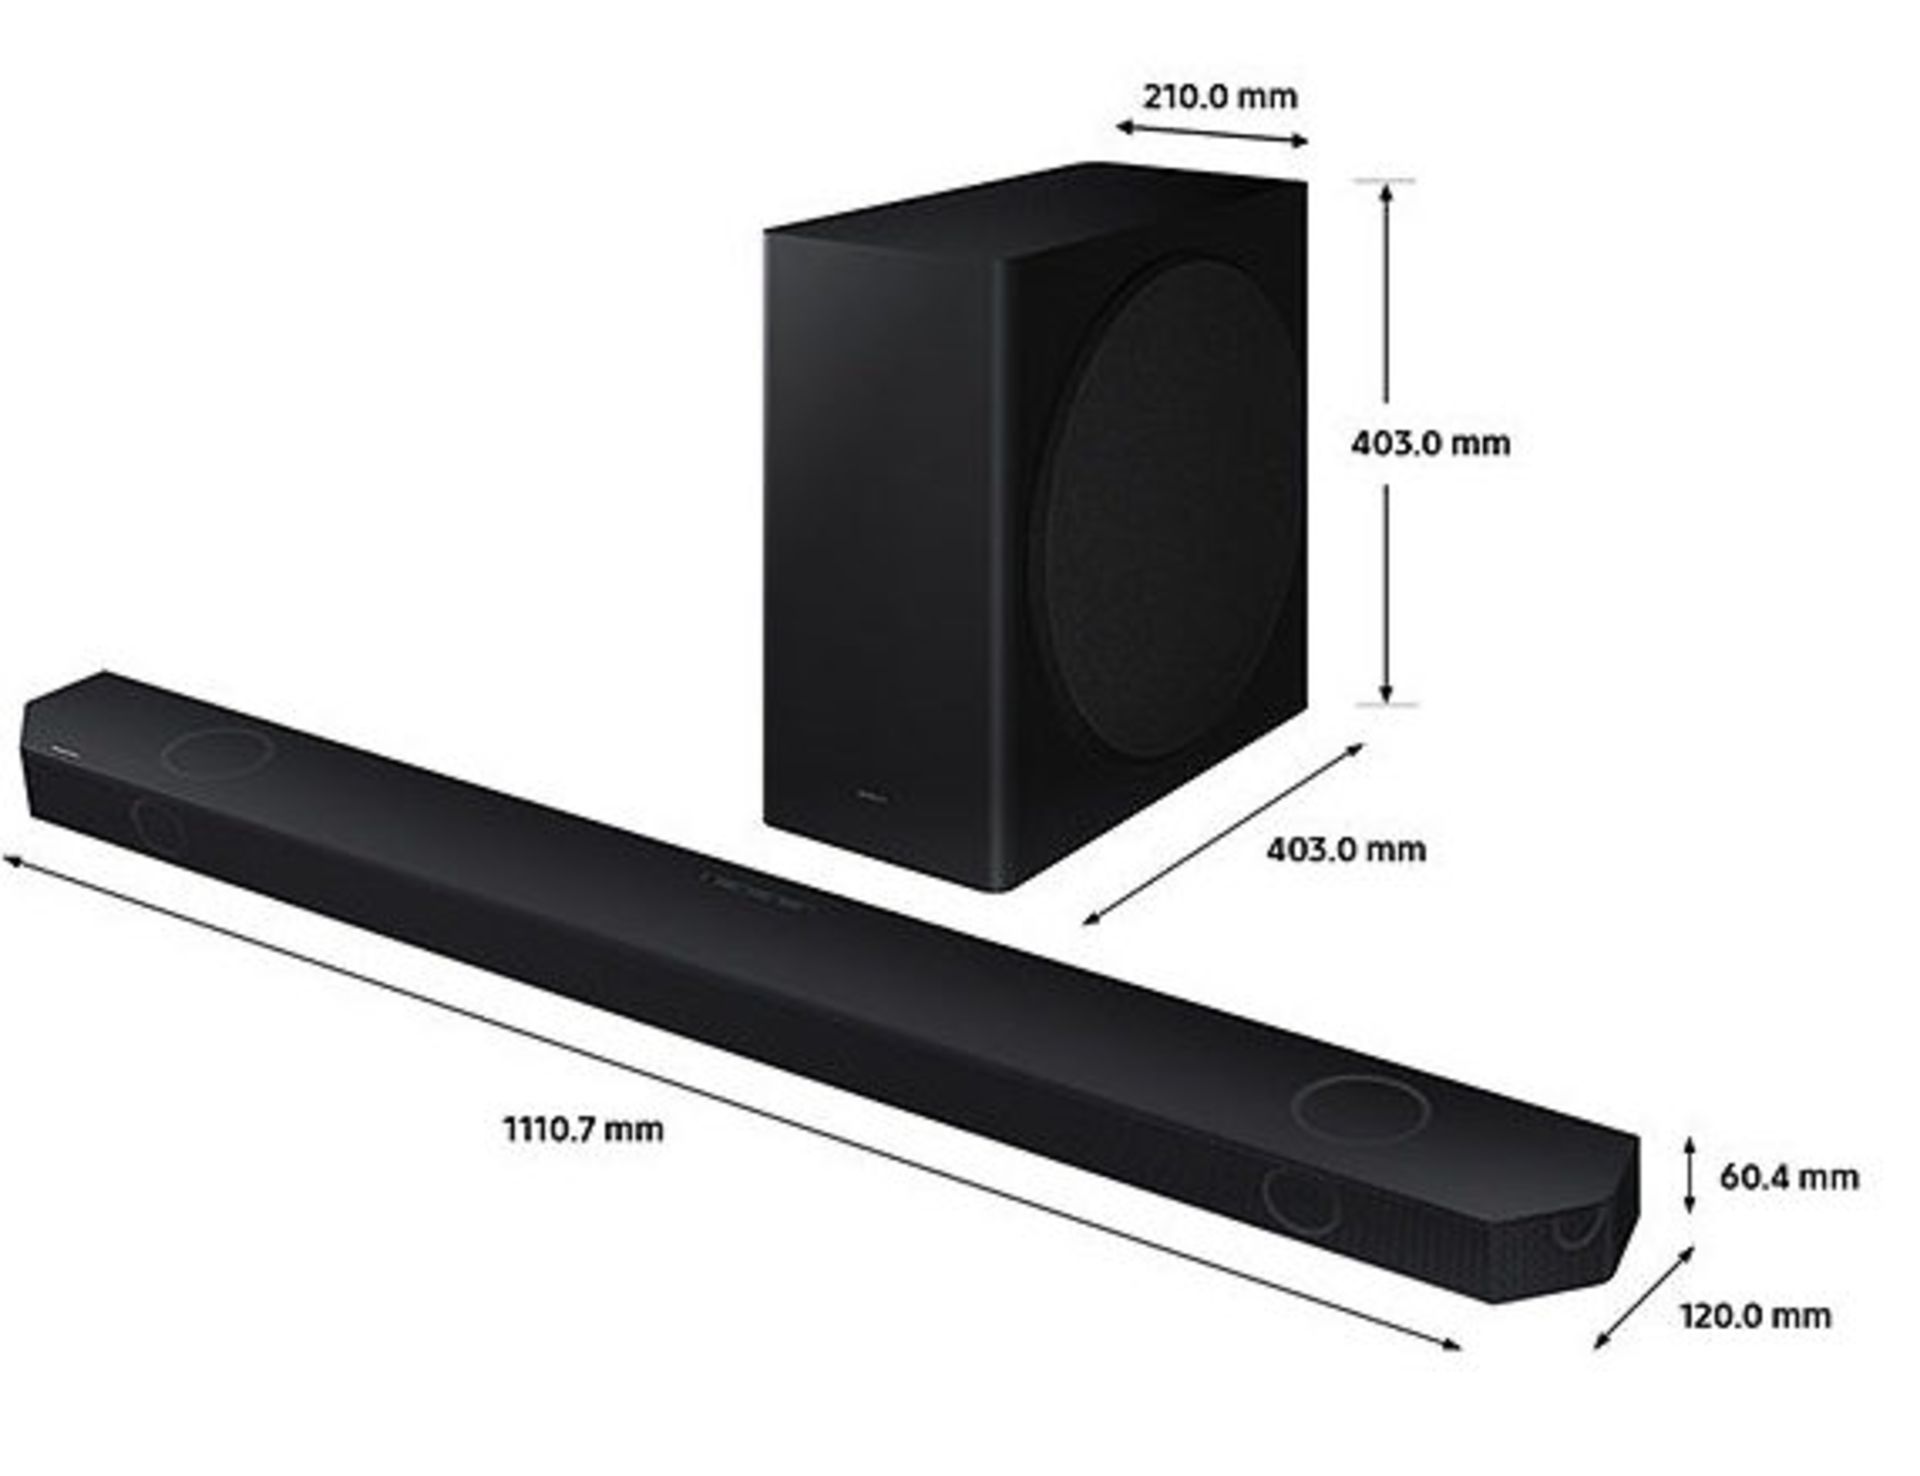 SAMSUNG HW-Q600C/XU 3.1.2 WIRELESS SOUND BAR WITH DOLBY ATMOS - WITH WARRANTY PACK - RRP £599 - Image 2 of 8